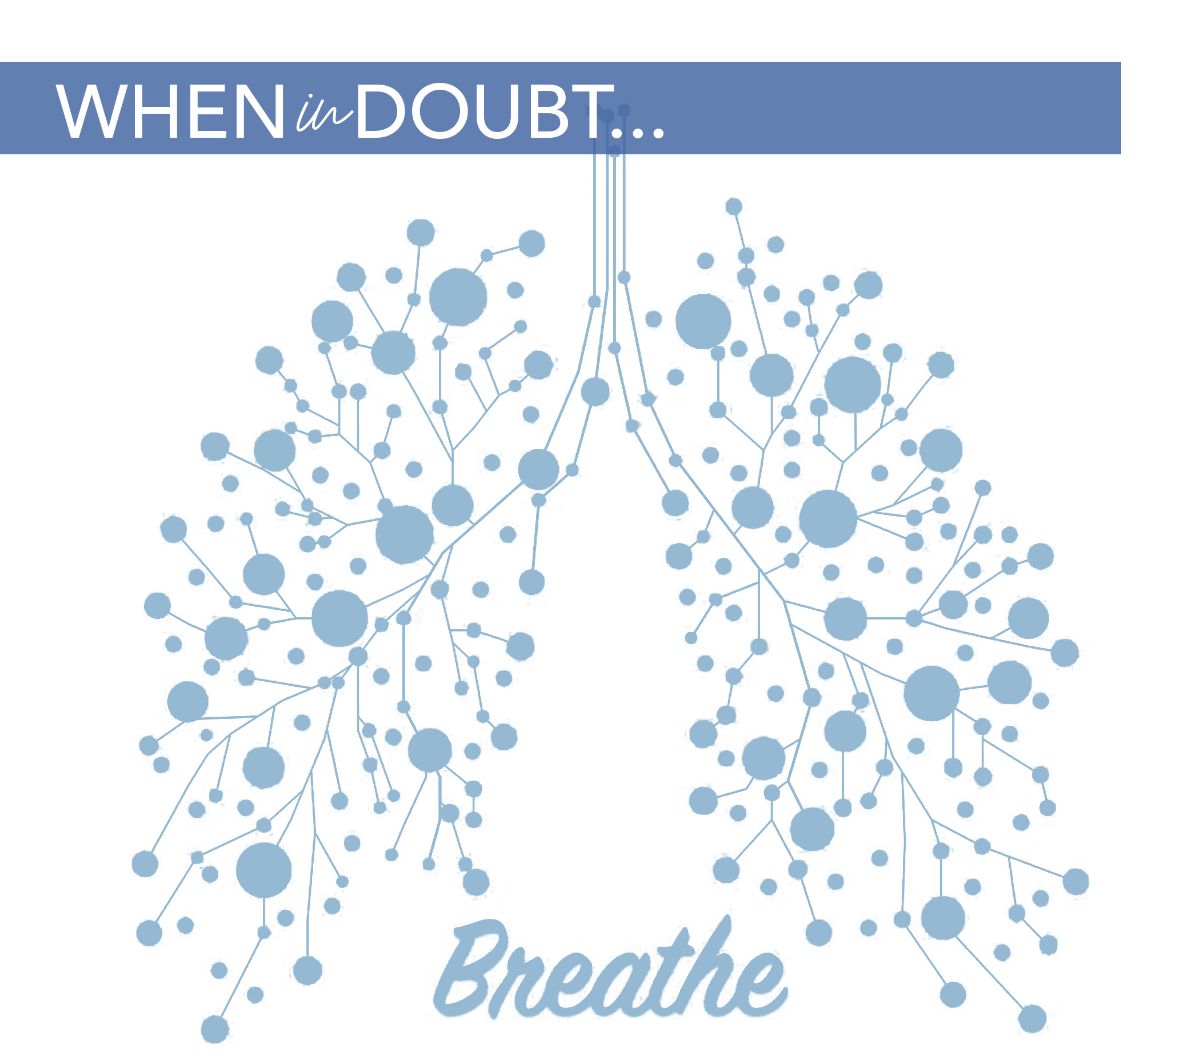 Just Breath Yoga Breathing for Anxiety